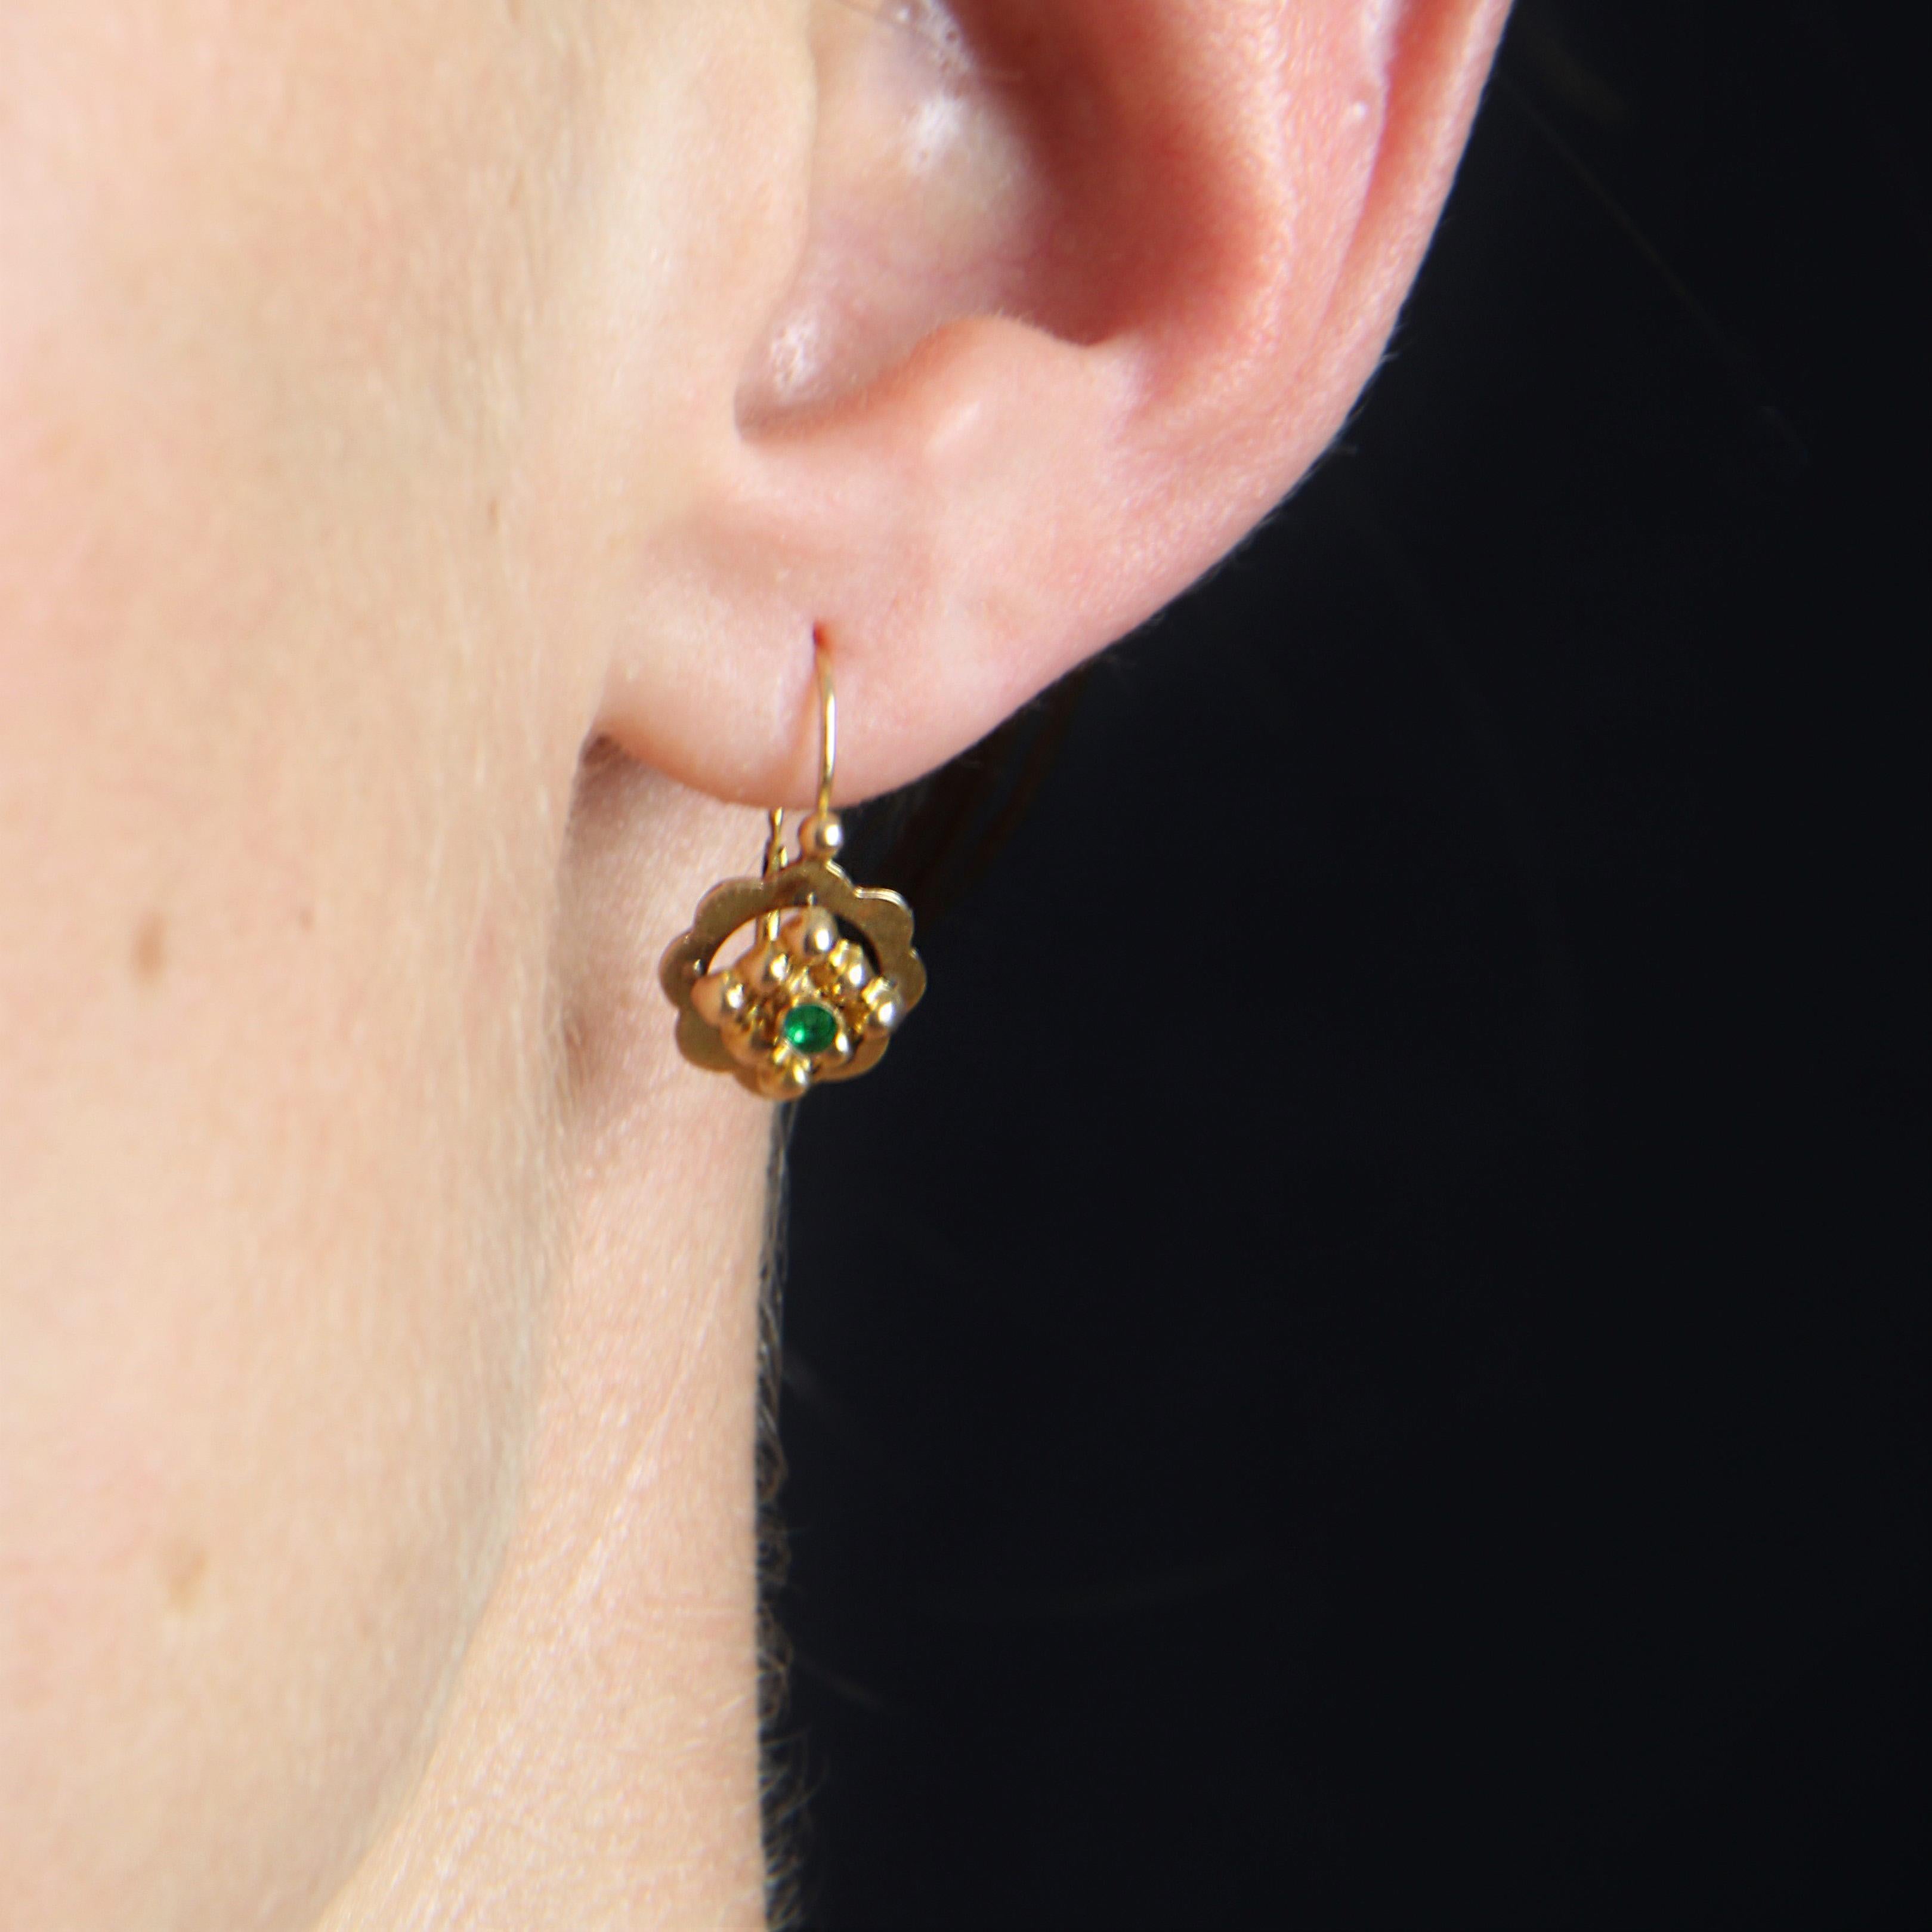 For pierced ears.
Earring in 18 karat rose gold, eagle head hallmark.
These antique lever-back earrings form a flower with an applied rhombus of gold pearls set in the center with an emerald. The clasp threads through the back.
Height : 17,5 mm